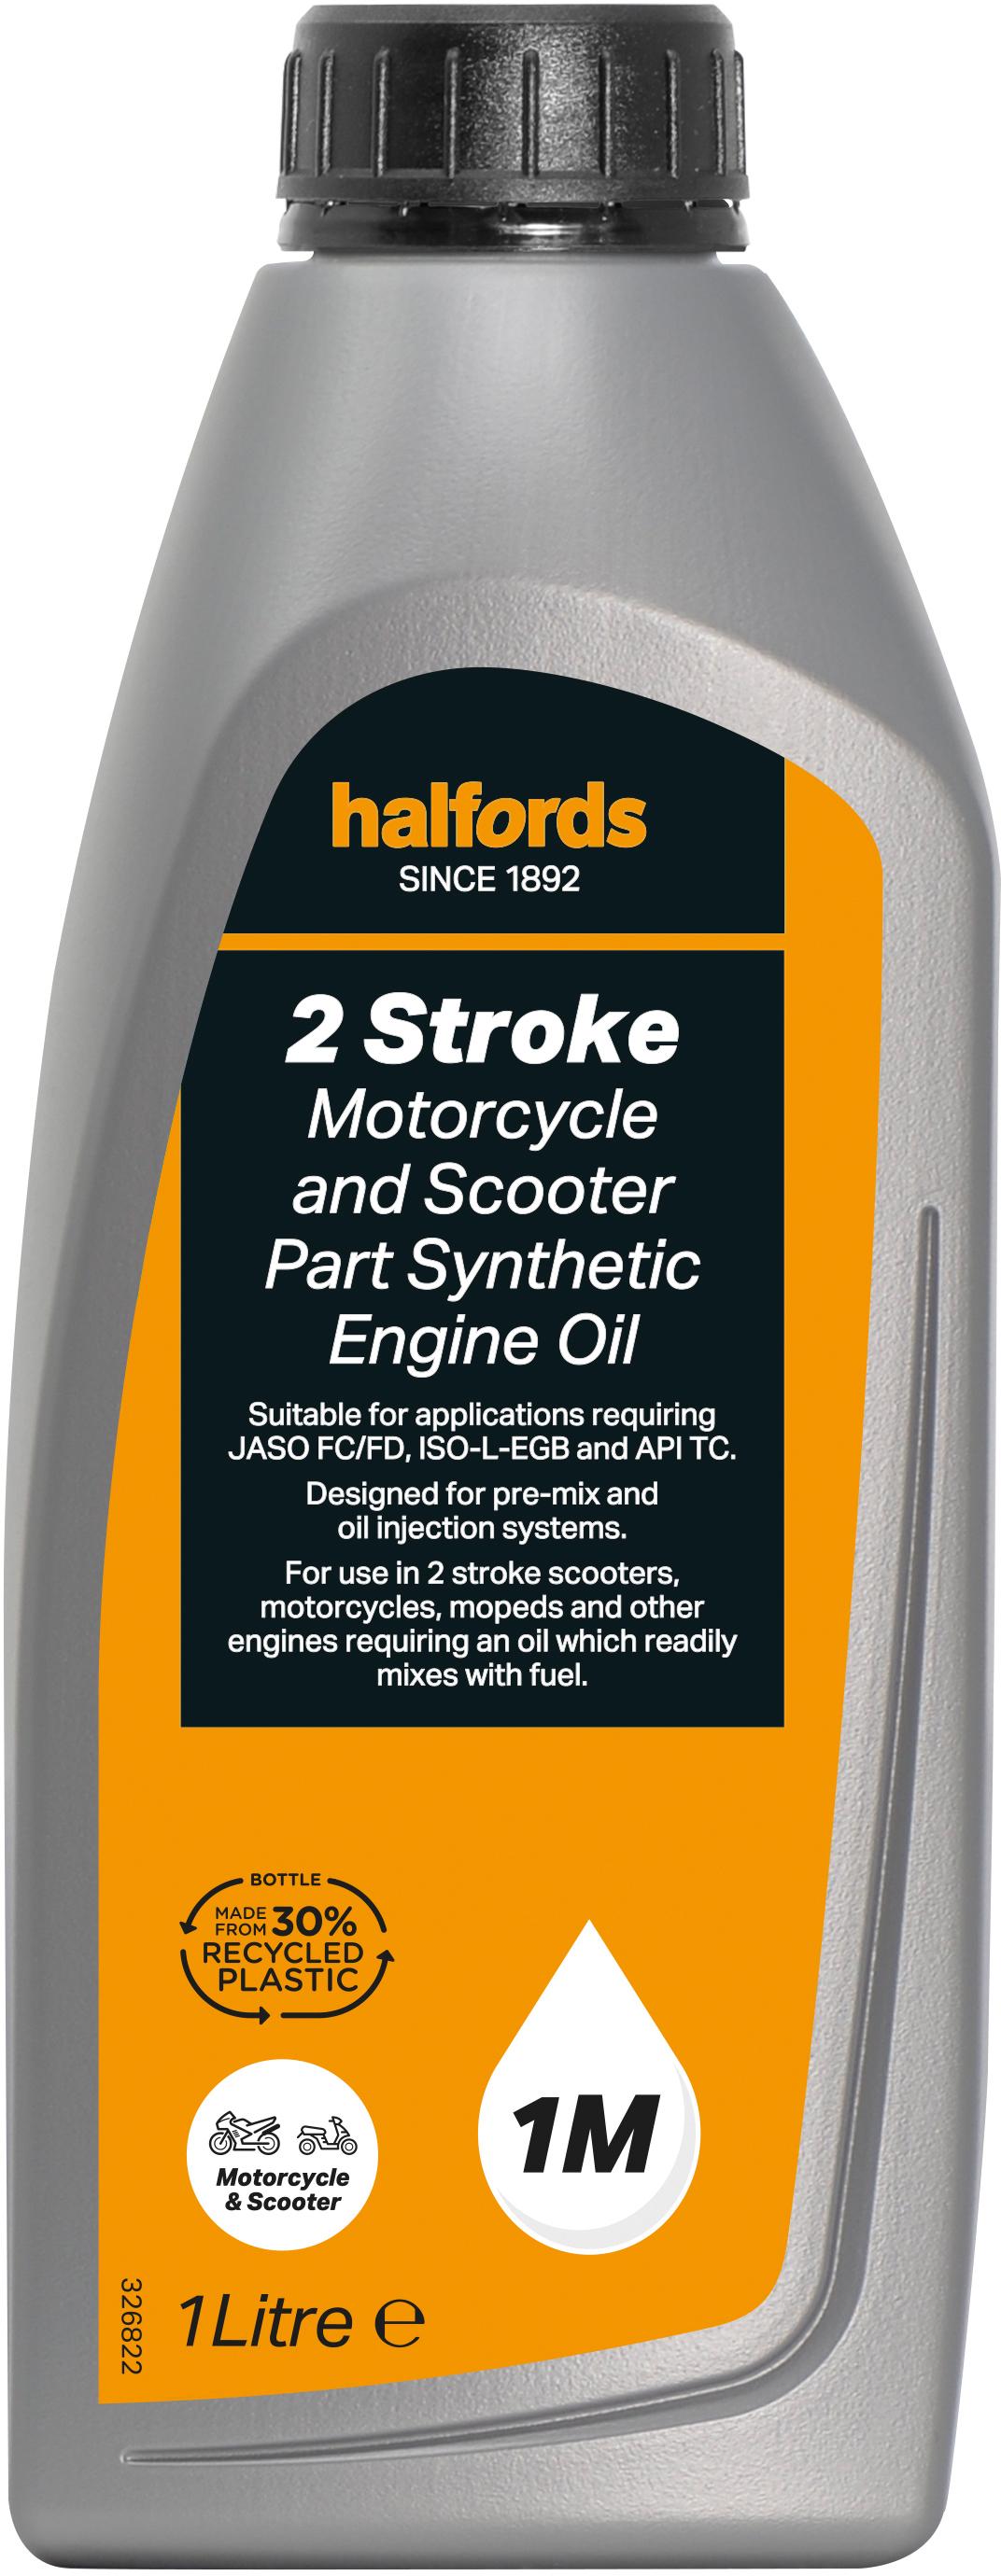 Halfords 2 Stroke Part Synthetic Motorcycle Oil 1L